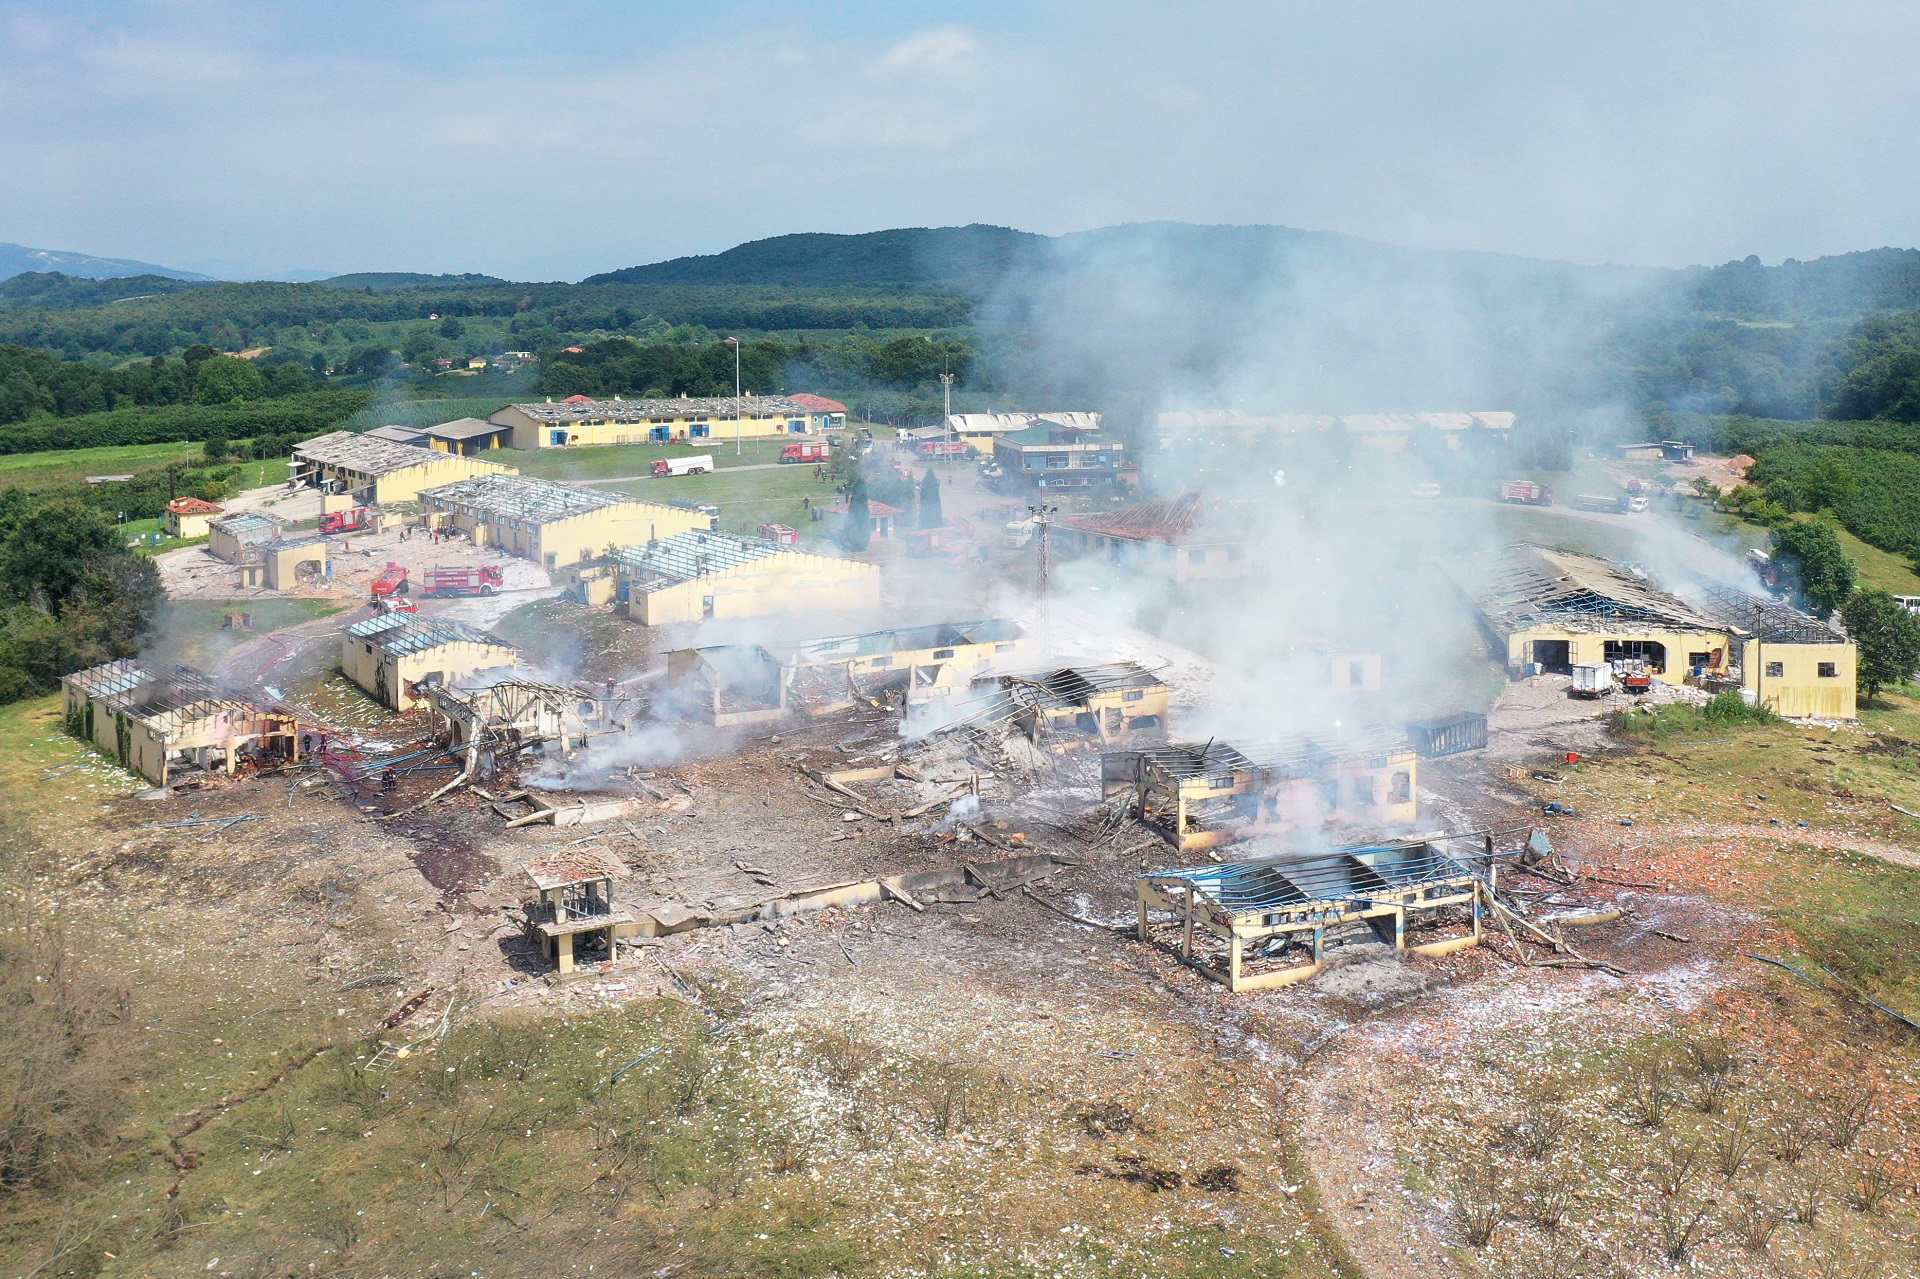 epa08525379 An aerial view of the firework factory following a blast in Hendek district of Sakarya city, Turkey, 03 July 2020. At last four workers died and 97 were injured in the incident, reports state. 

TURKEY OUT, USA OUT, UK OUT, CANADA OUT, FRANCE OUT, SWEDEN OUT, IRAQ OUT, JORDAN OUT, KUWAIT OUT, LEBANON OUT, OMAN OUT, QATAR OUT, SAUDI ARABIA OUT, SYRIA OUT, UAE OUT, YEMEN OUT, BAHRAIN OUT, EGYPT OUT, LIBYA OUT, ALGERIA OUT, MOROCCO OUT, TUNISIA OUT, SHUTTERSTOCK OUT  EPA/TAHIR TURAN EROGLU  SHUTTERSTOCK OUT